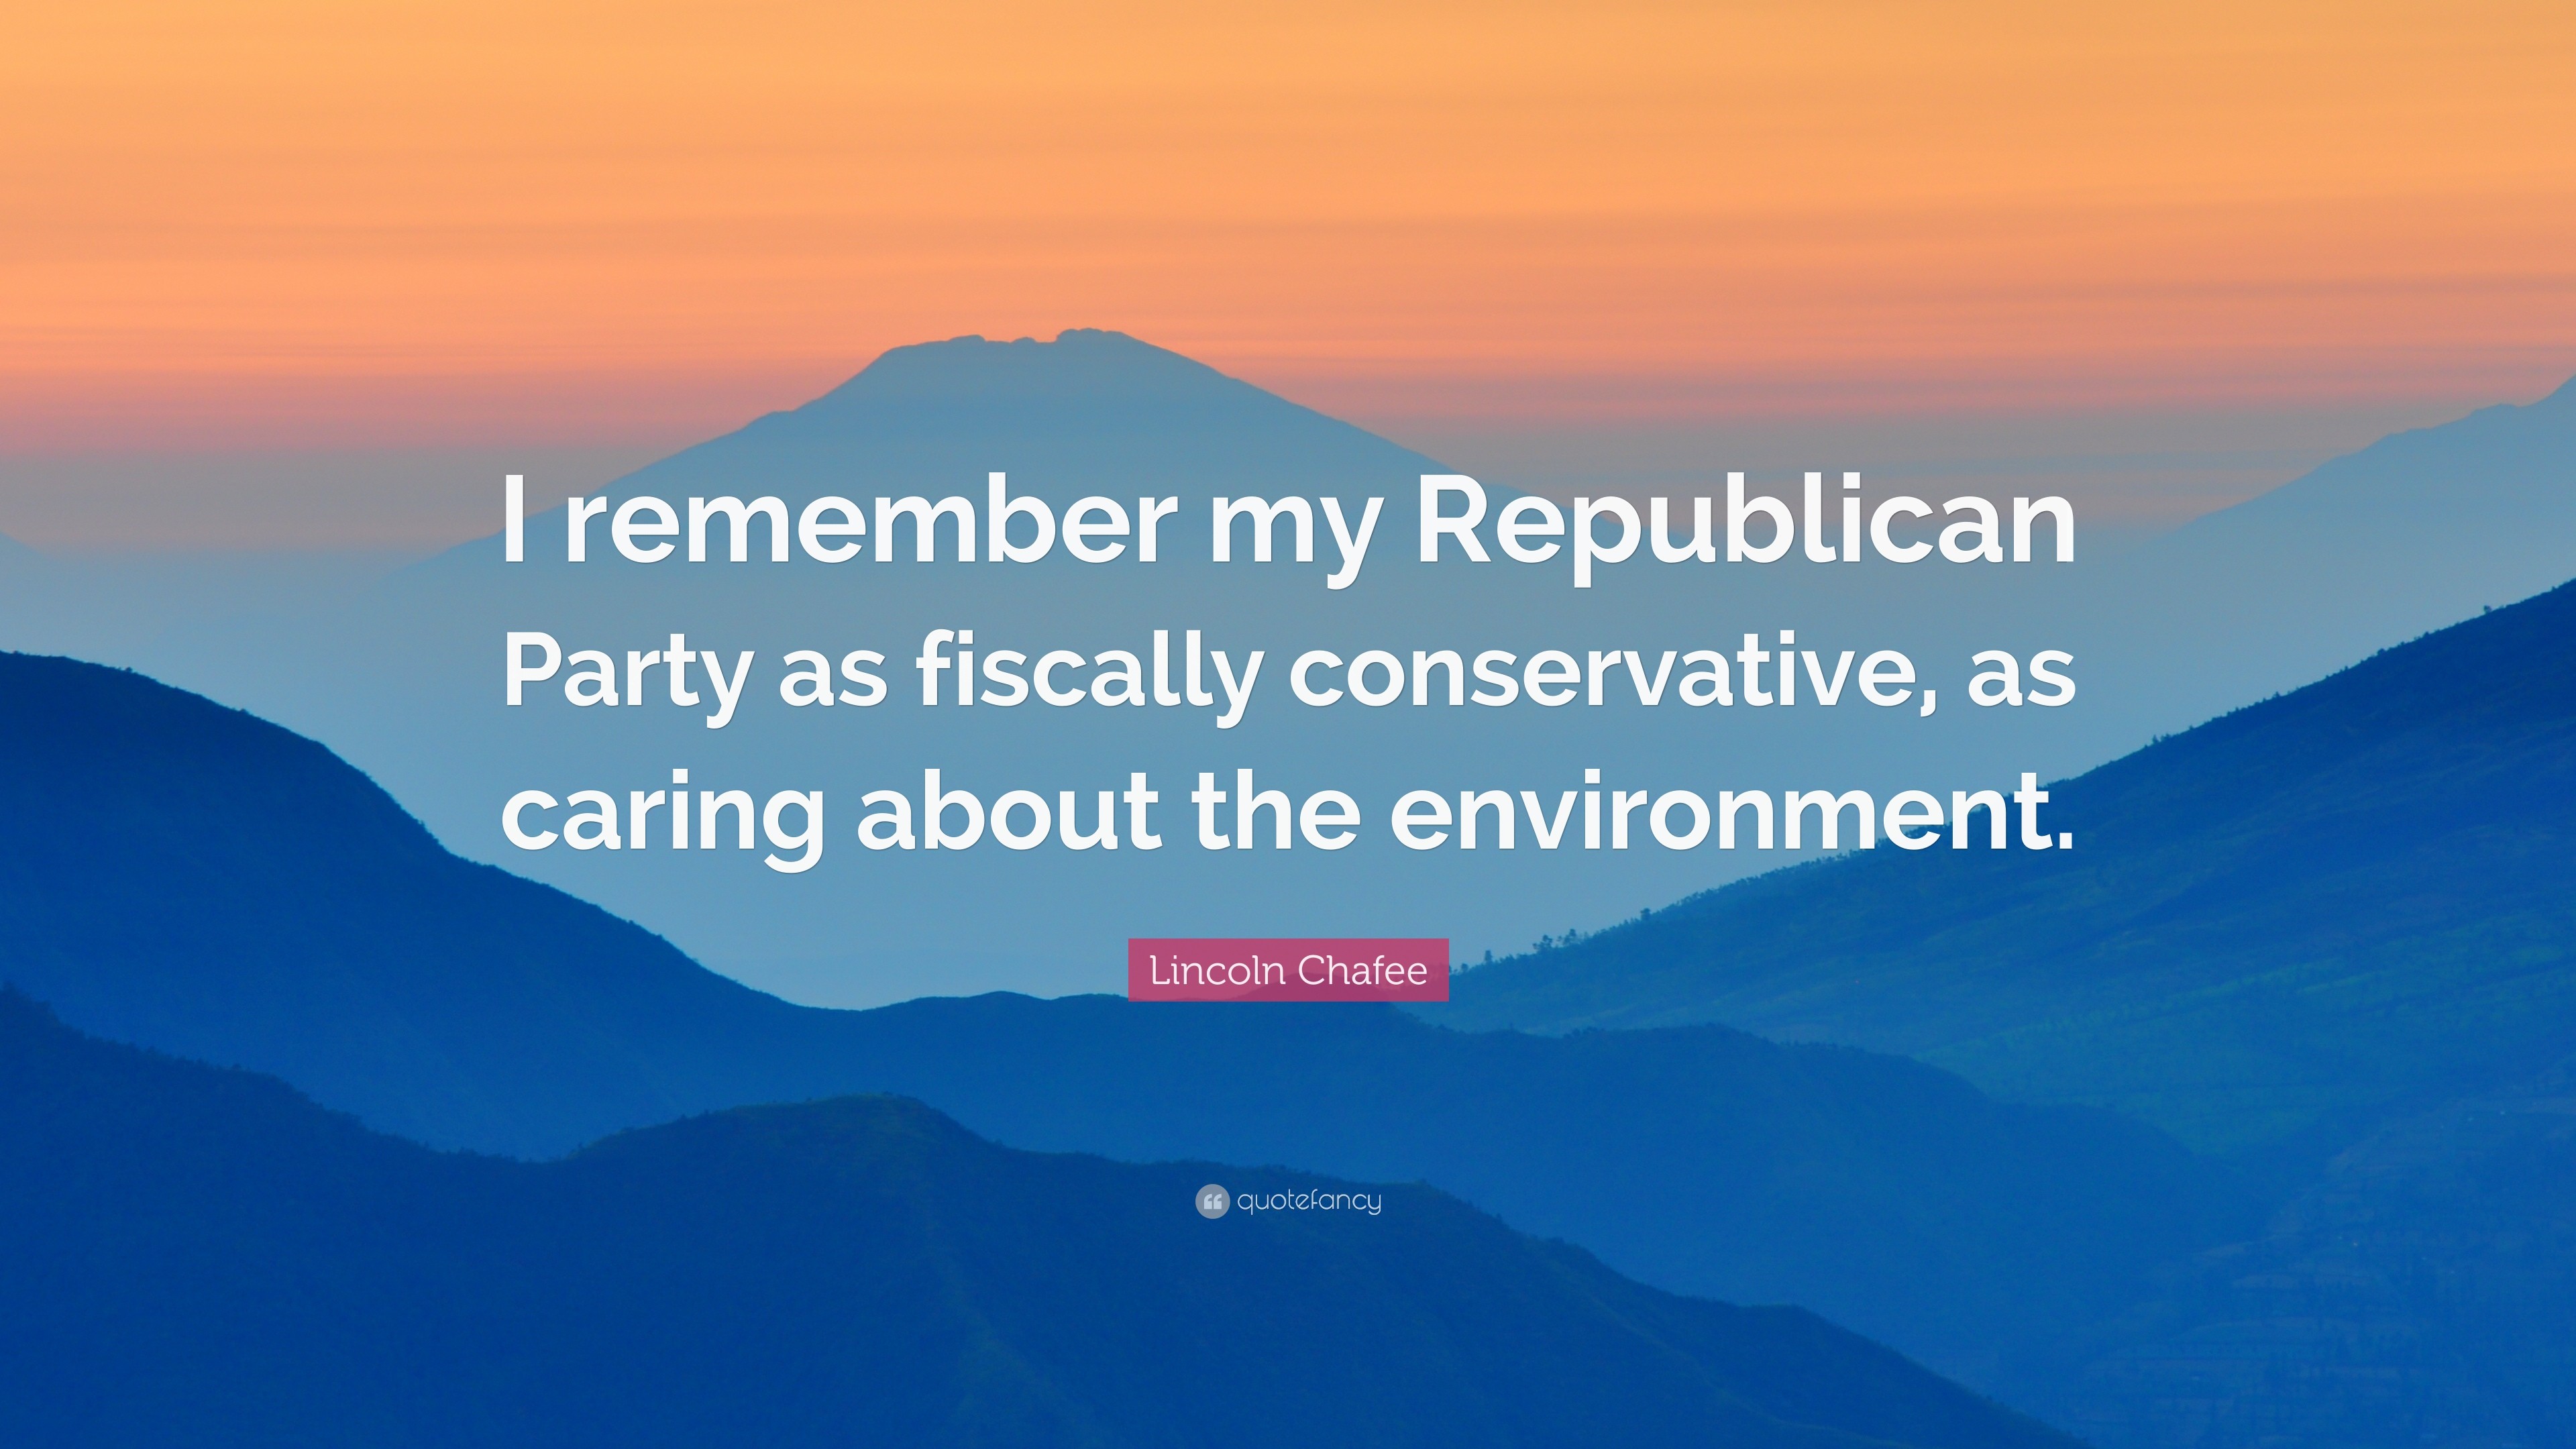 3840x2160 Lincoln Chafee Quote: “I remember my Republican Party as fiscally  conservative, as caring